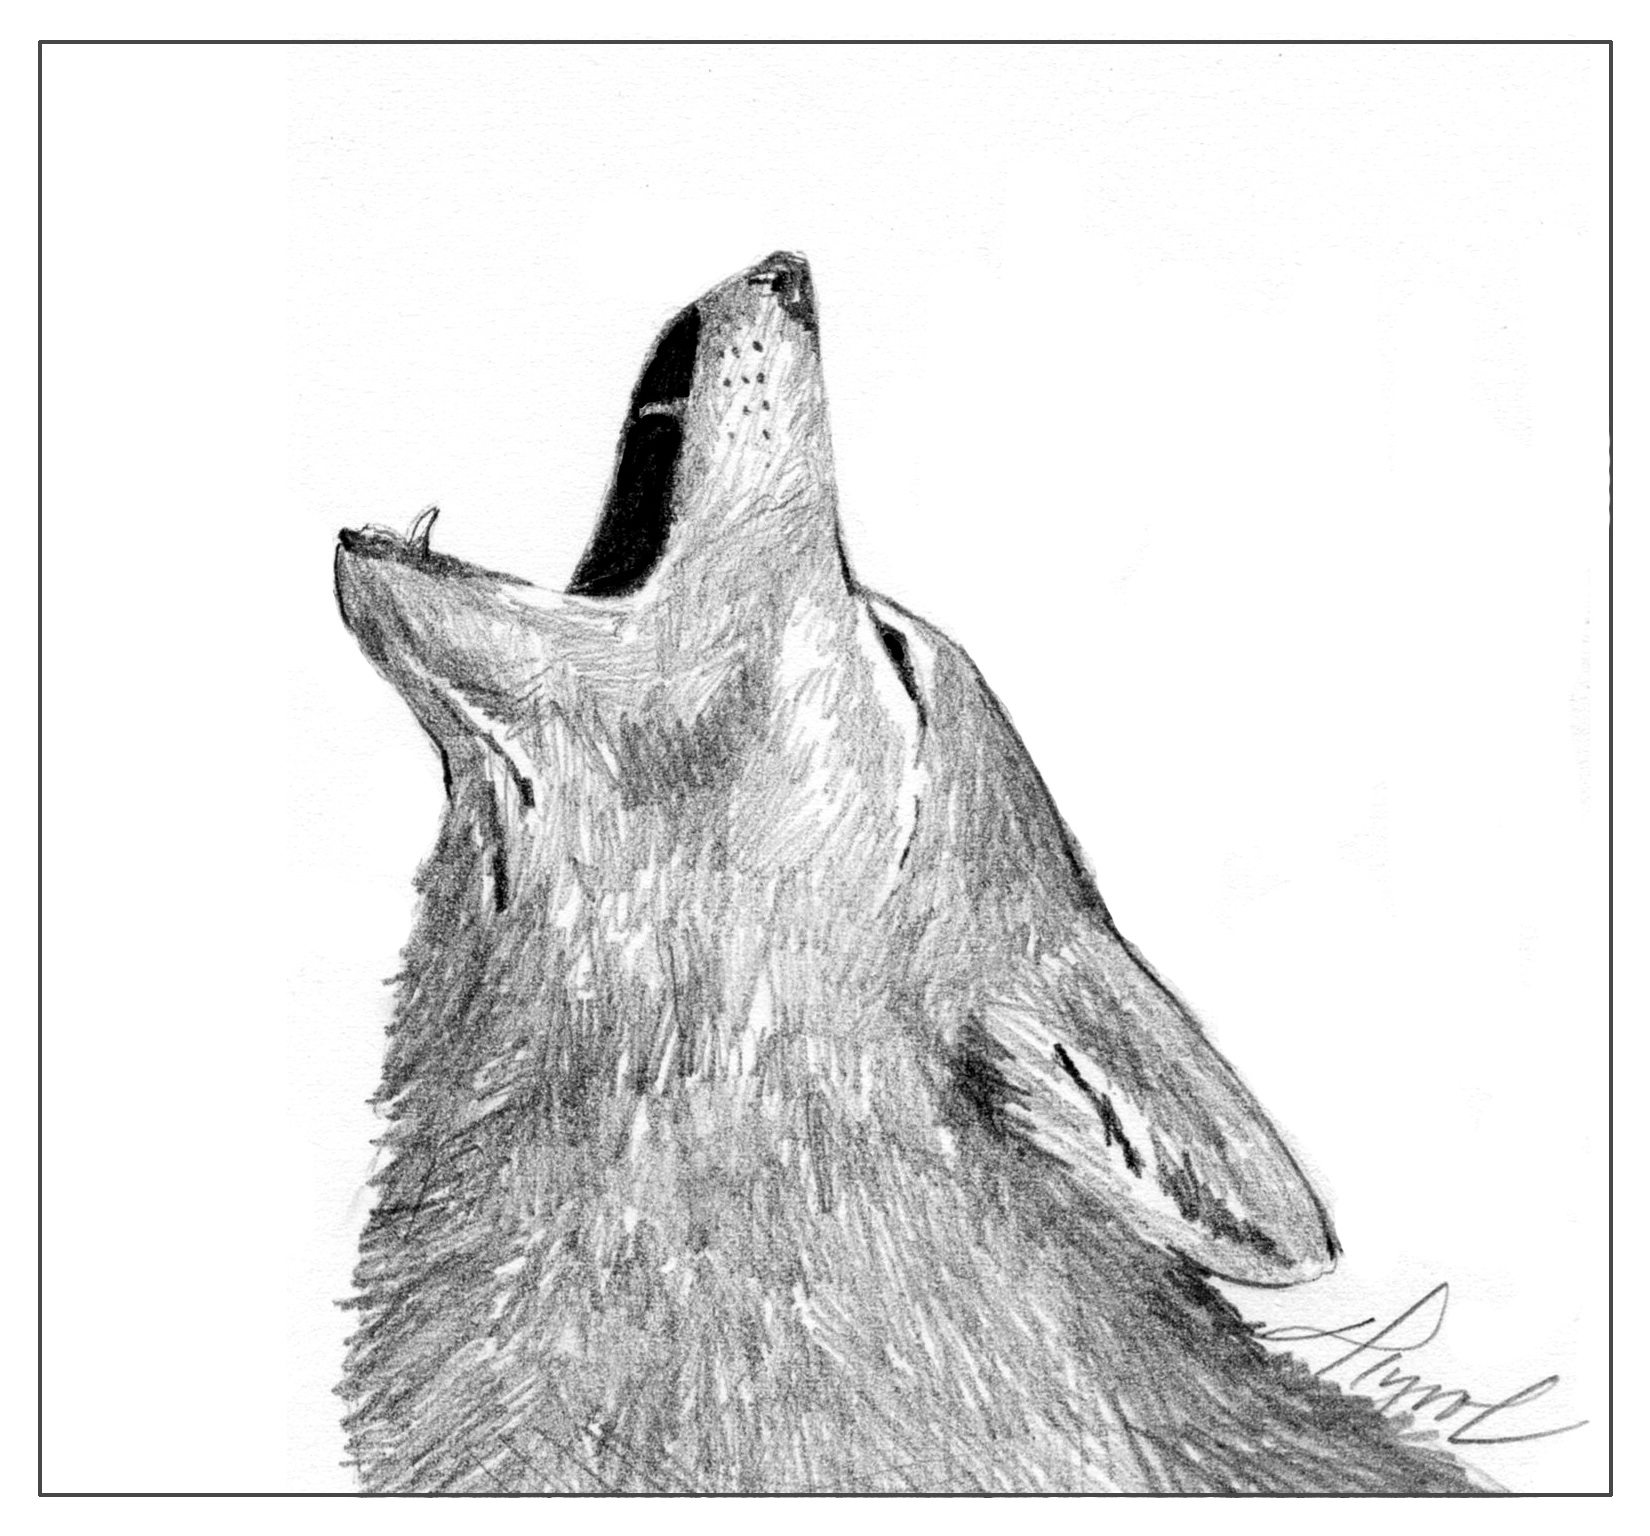 Coyotes: Decoding Their Yips, Barks, and Howls - - The Adirondack ...